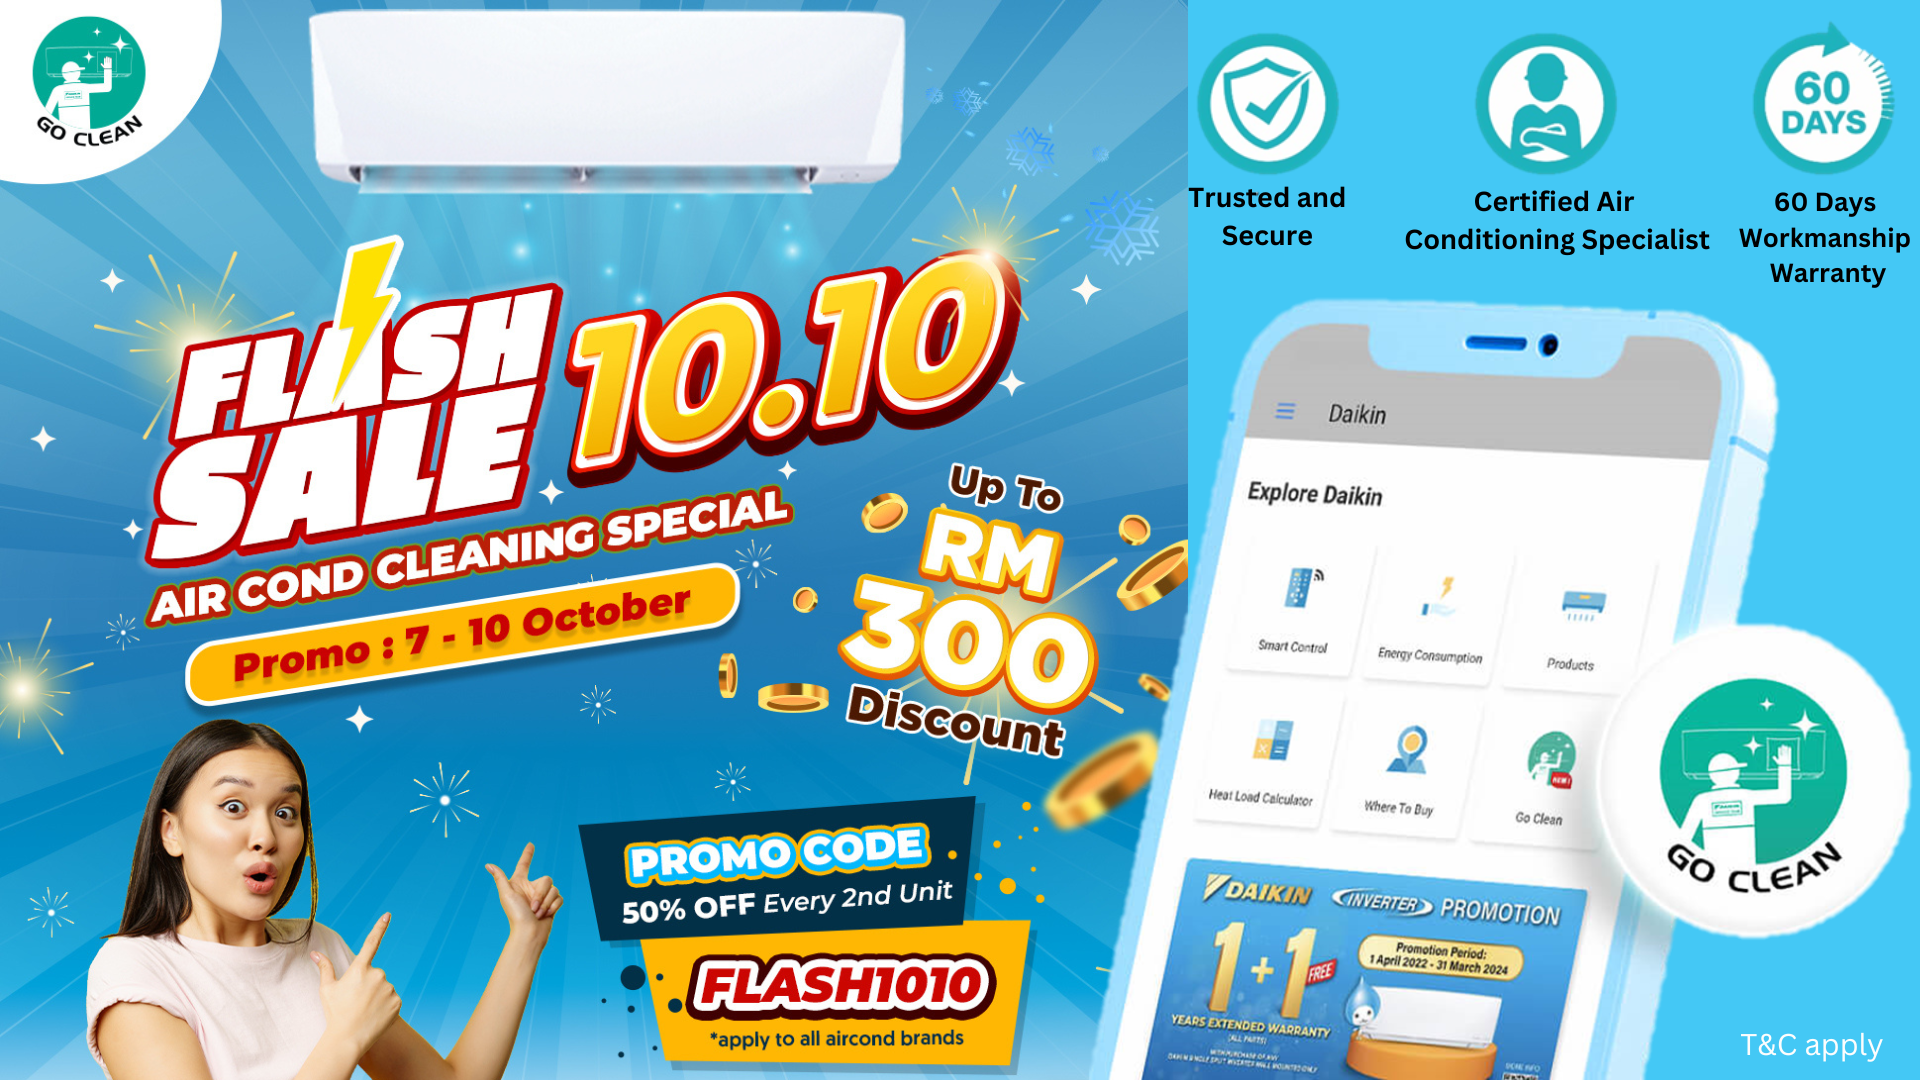 FLASH1010 Get 50% Off 2nd Unit For Every 2 Units | Daikin Malaysia